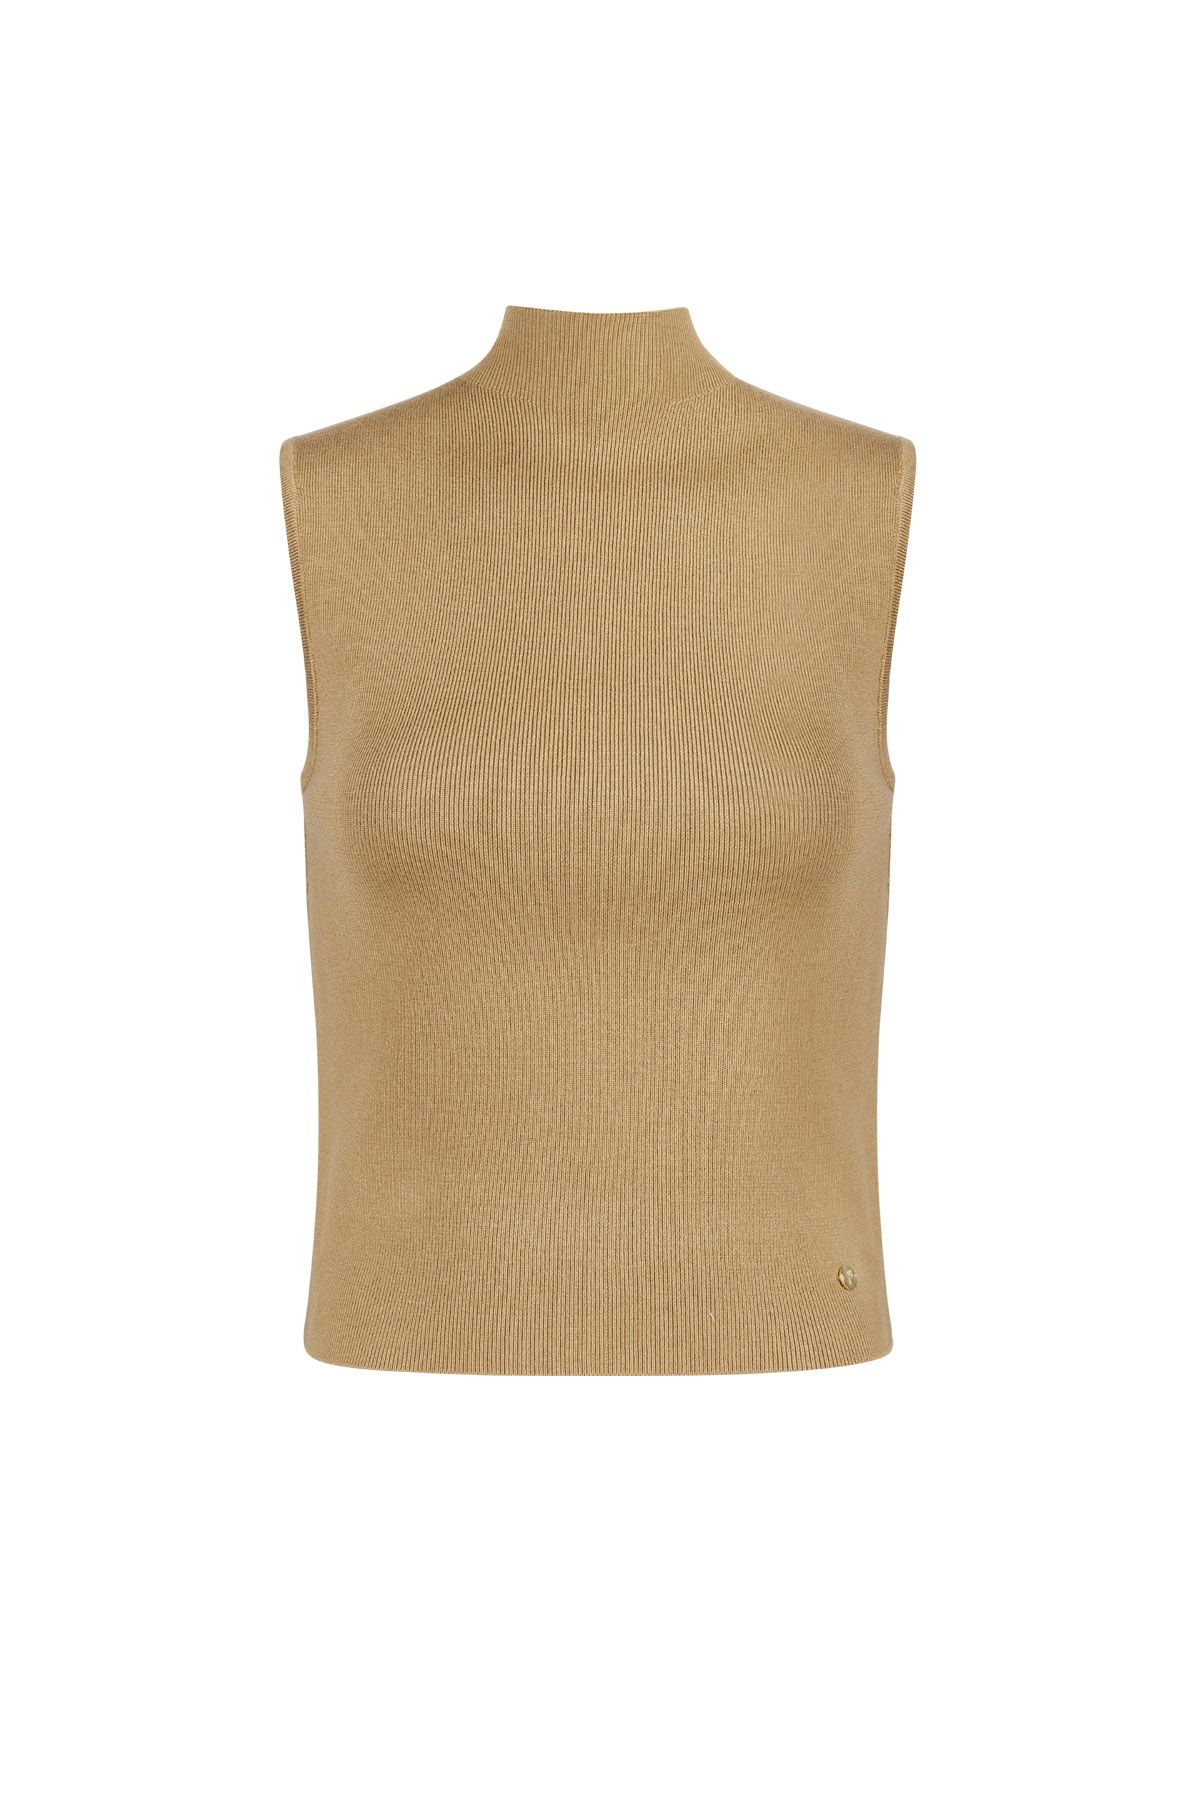 Sleeveless top with low turtleneck large/extra large – brown h5 